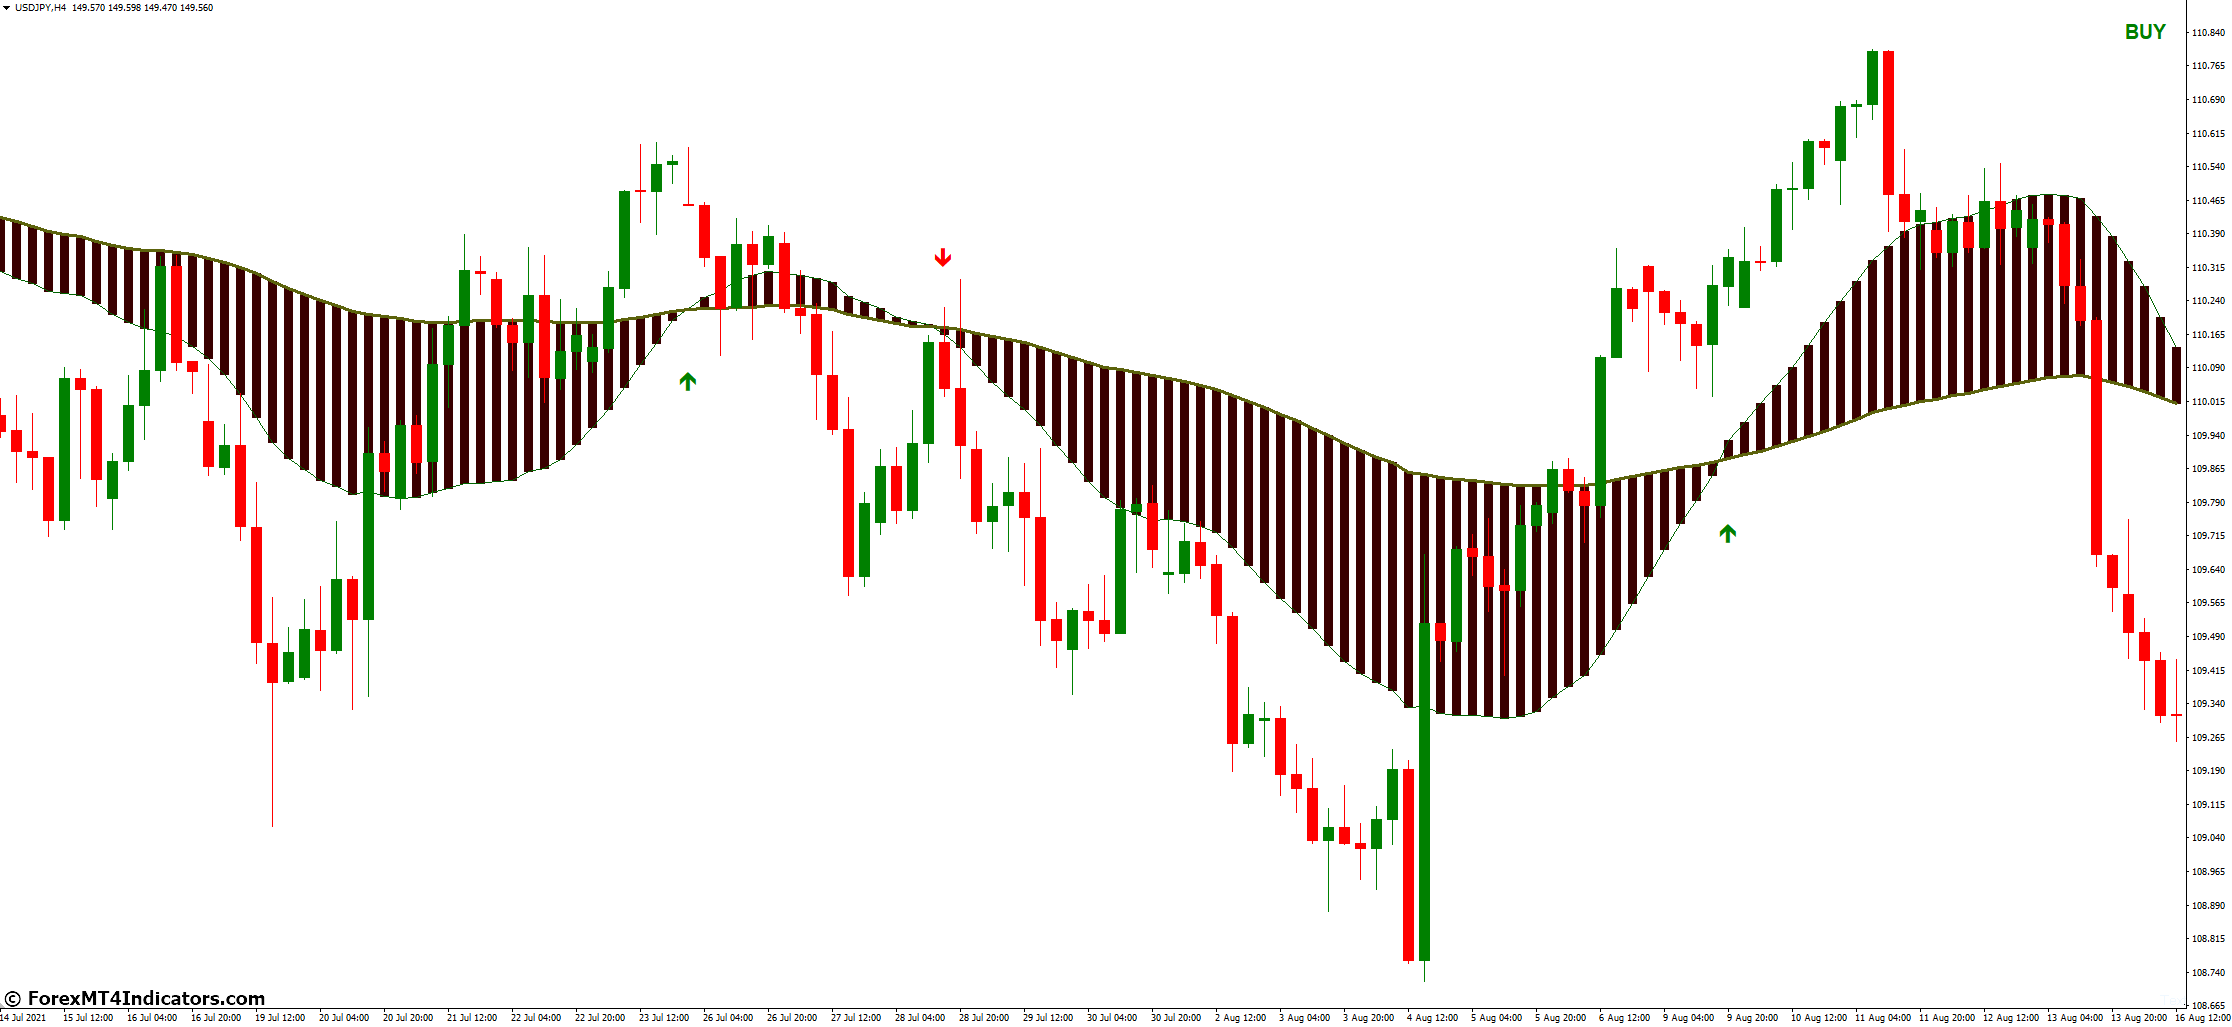 Key Features of the Moving Average Ribbon